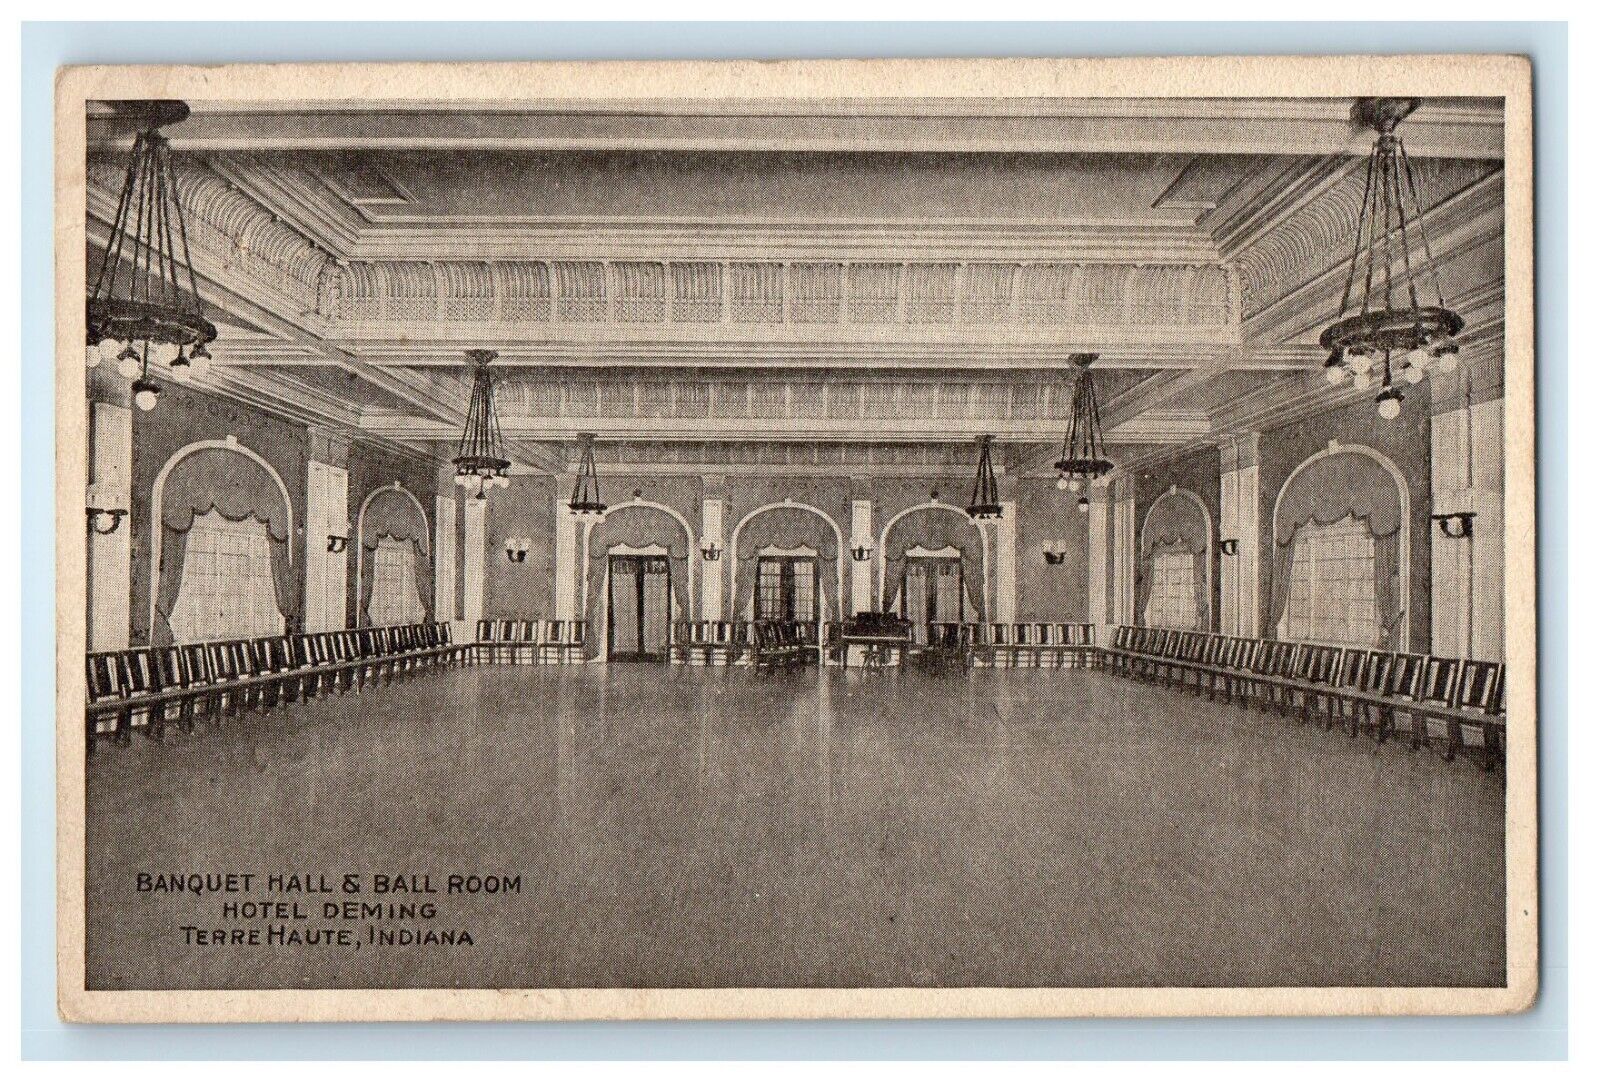 c1920's Banquet Hall & Ball Room Hotel Deming Terre Haute IN Vintage Postcard